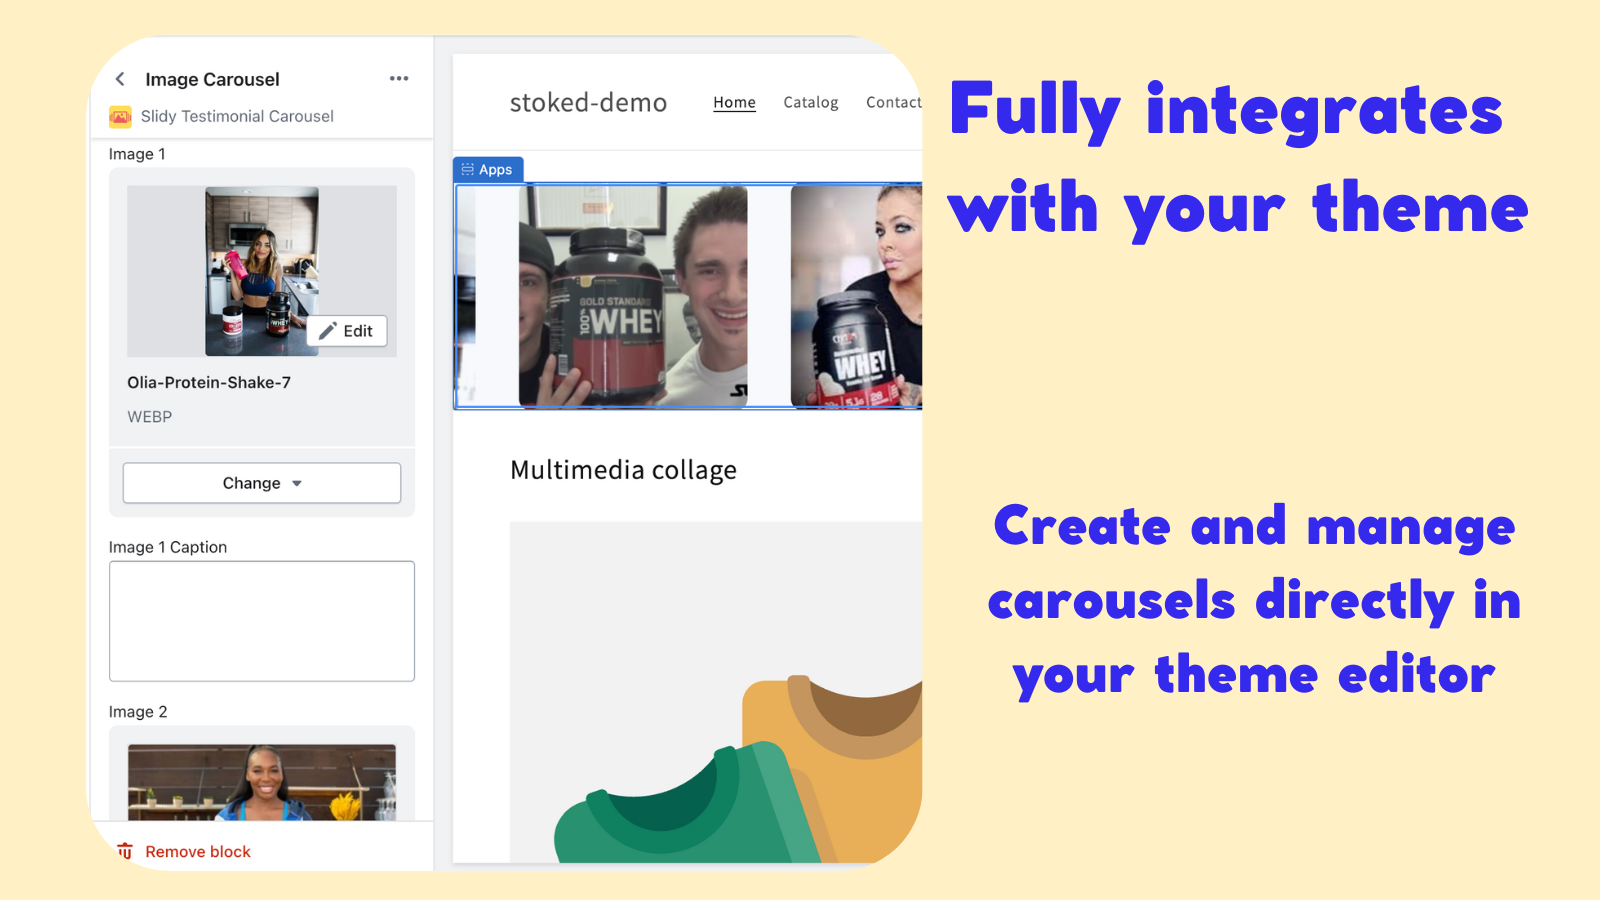 Create testimonial carousels directly from theme editor